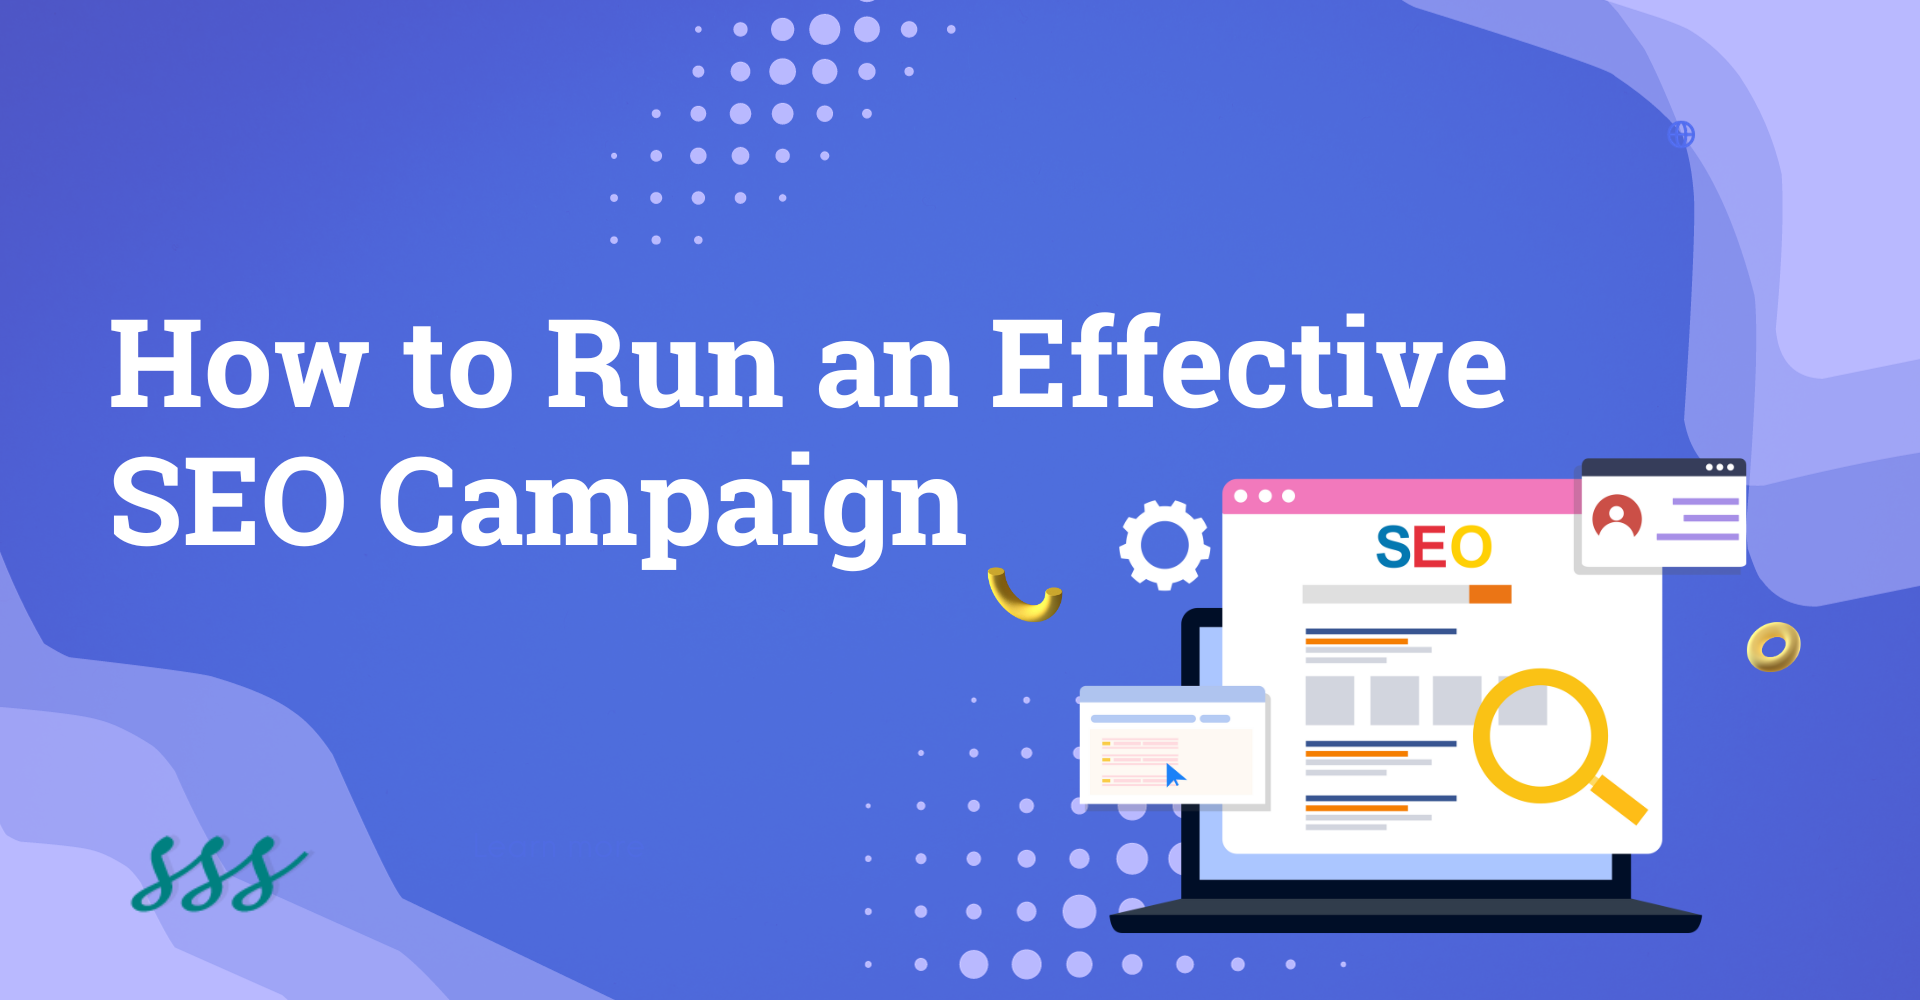 How to Run an Effective SEO Campaign